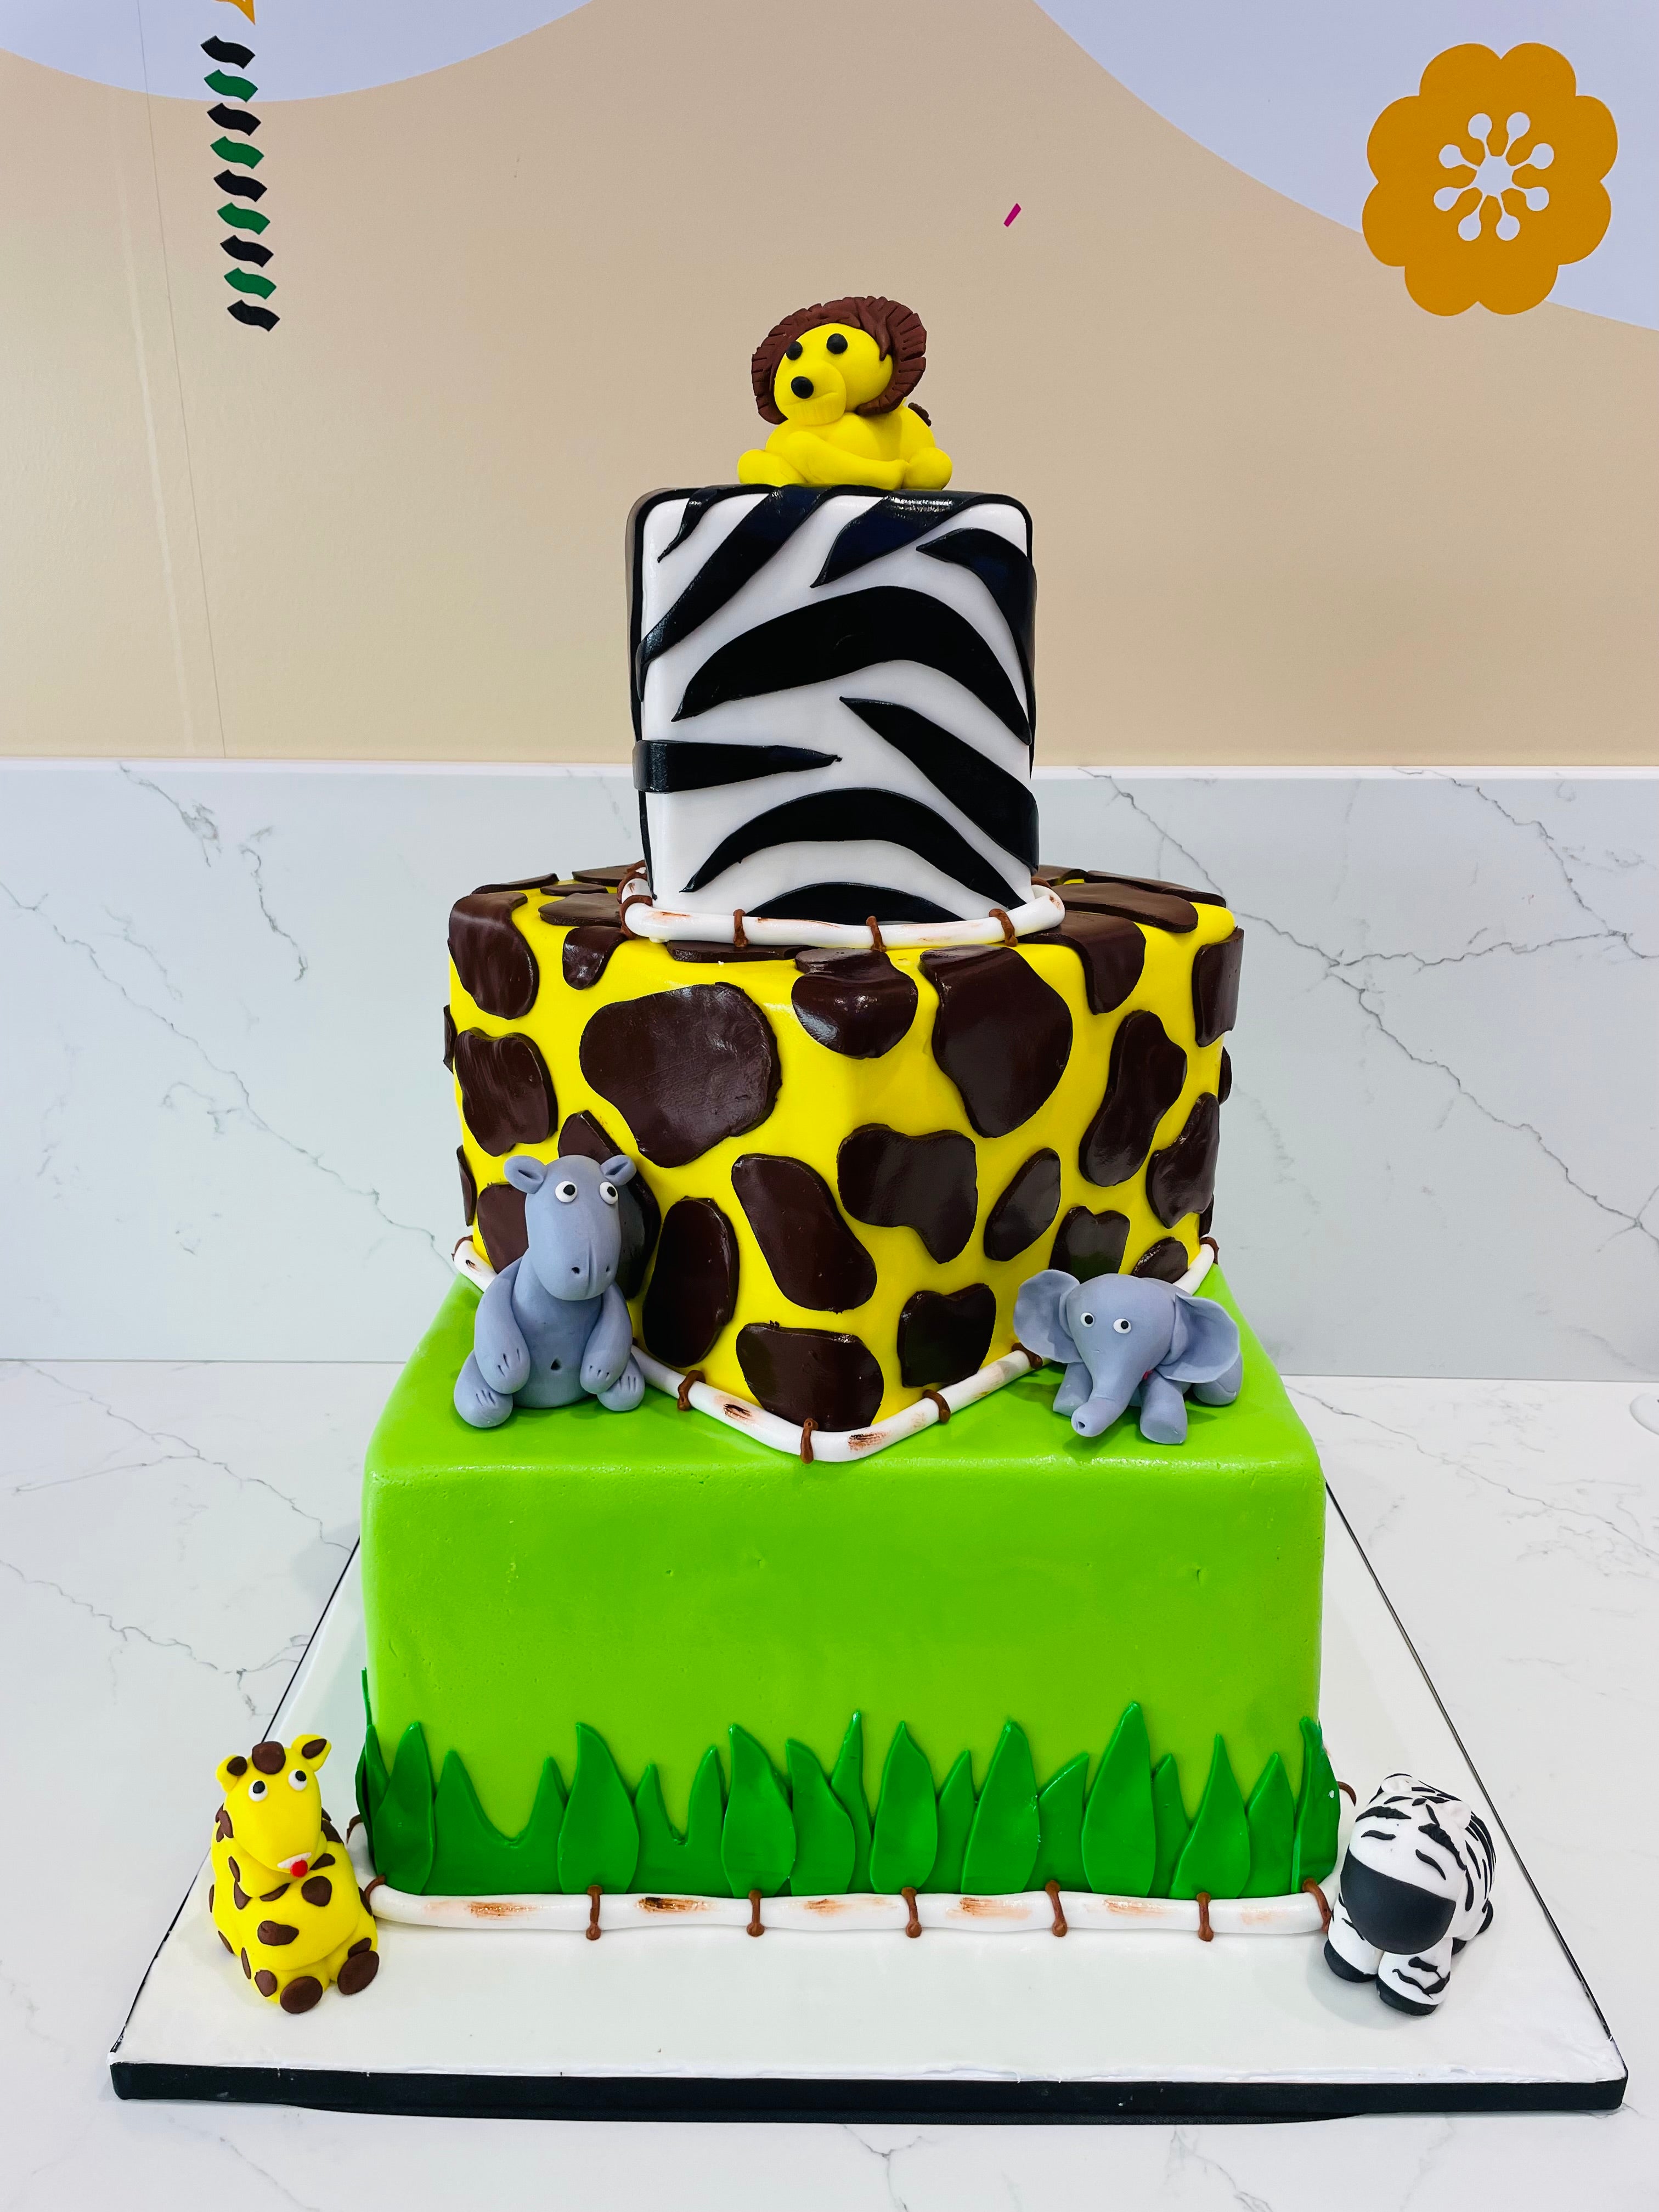 Making Fondant Animals and People | Sugarness...recipes from me to you